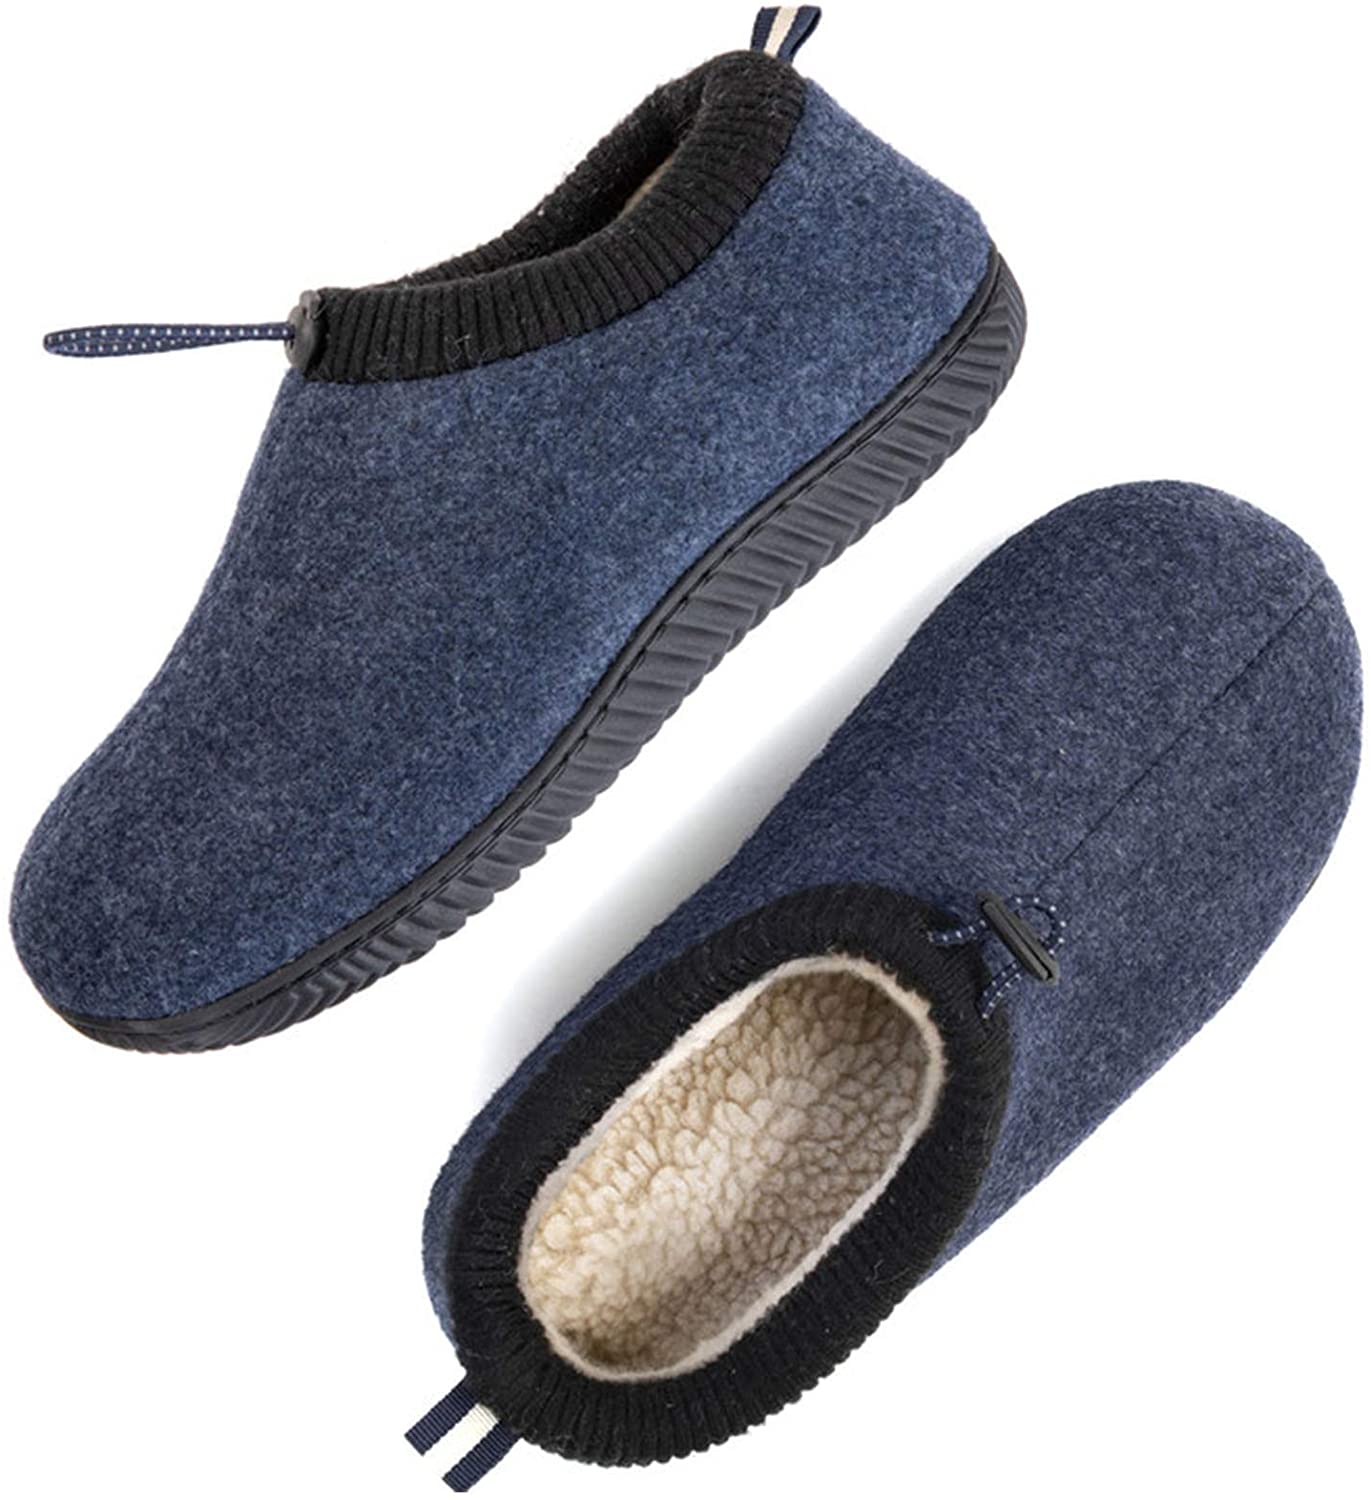 Warm Closed Back House Shoes with Indoor Outdoor Anti-Skid Rubber Sole ULTRAIDEAS Mens Cozy Memory Foam Woolen Slippers with Elasticated Collar 